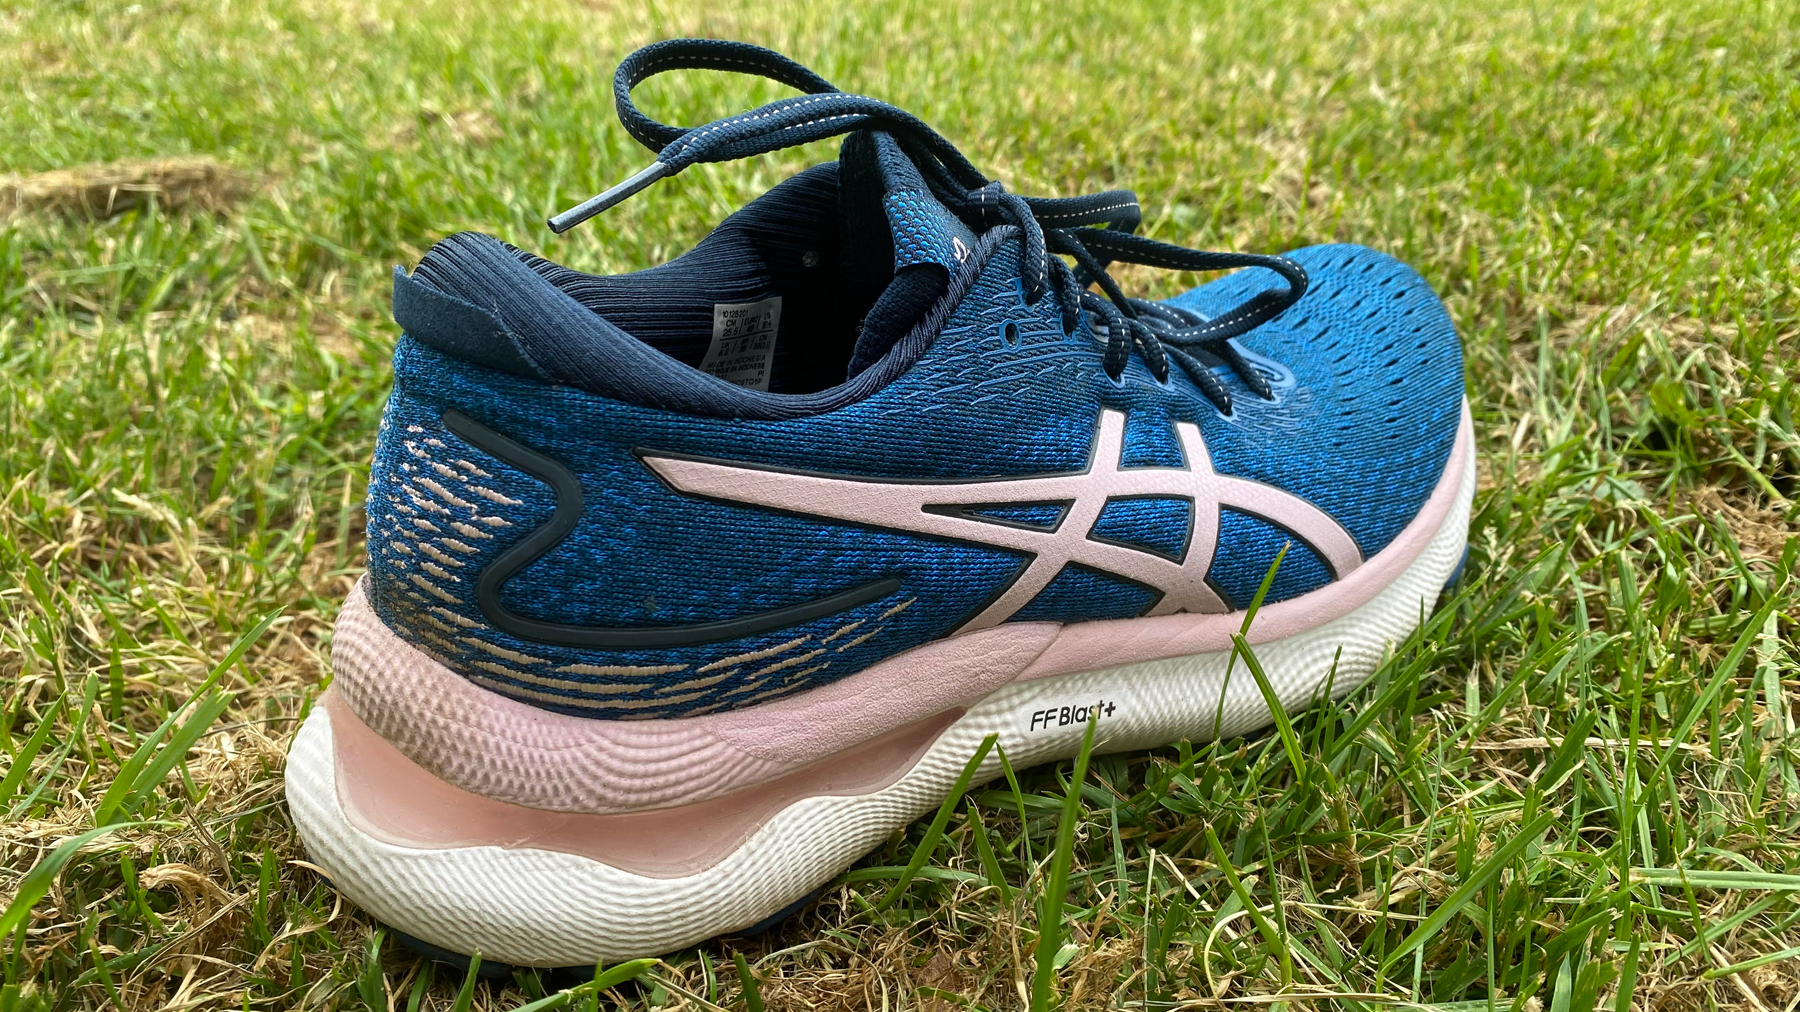 ASICS GEL-KAYANO ACE Golf Shoe Review - Plugged In Golf